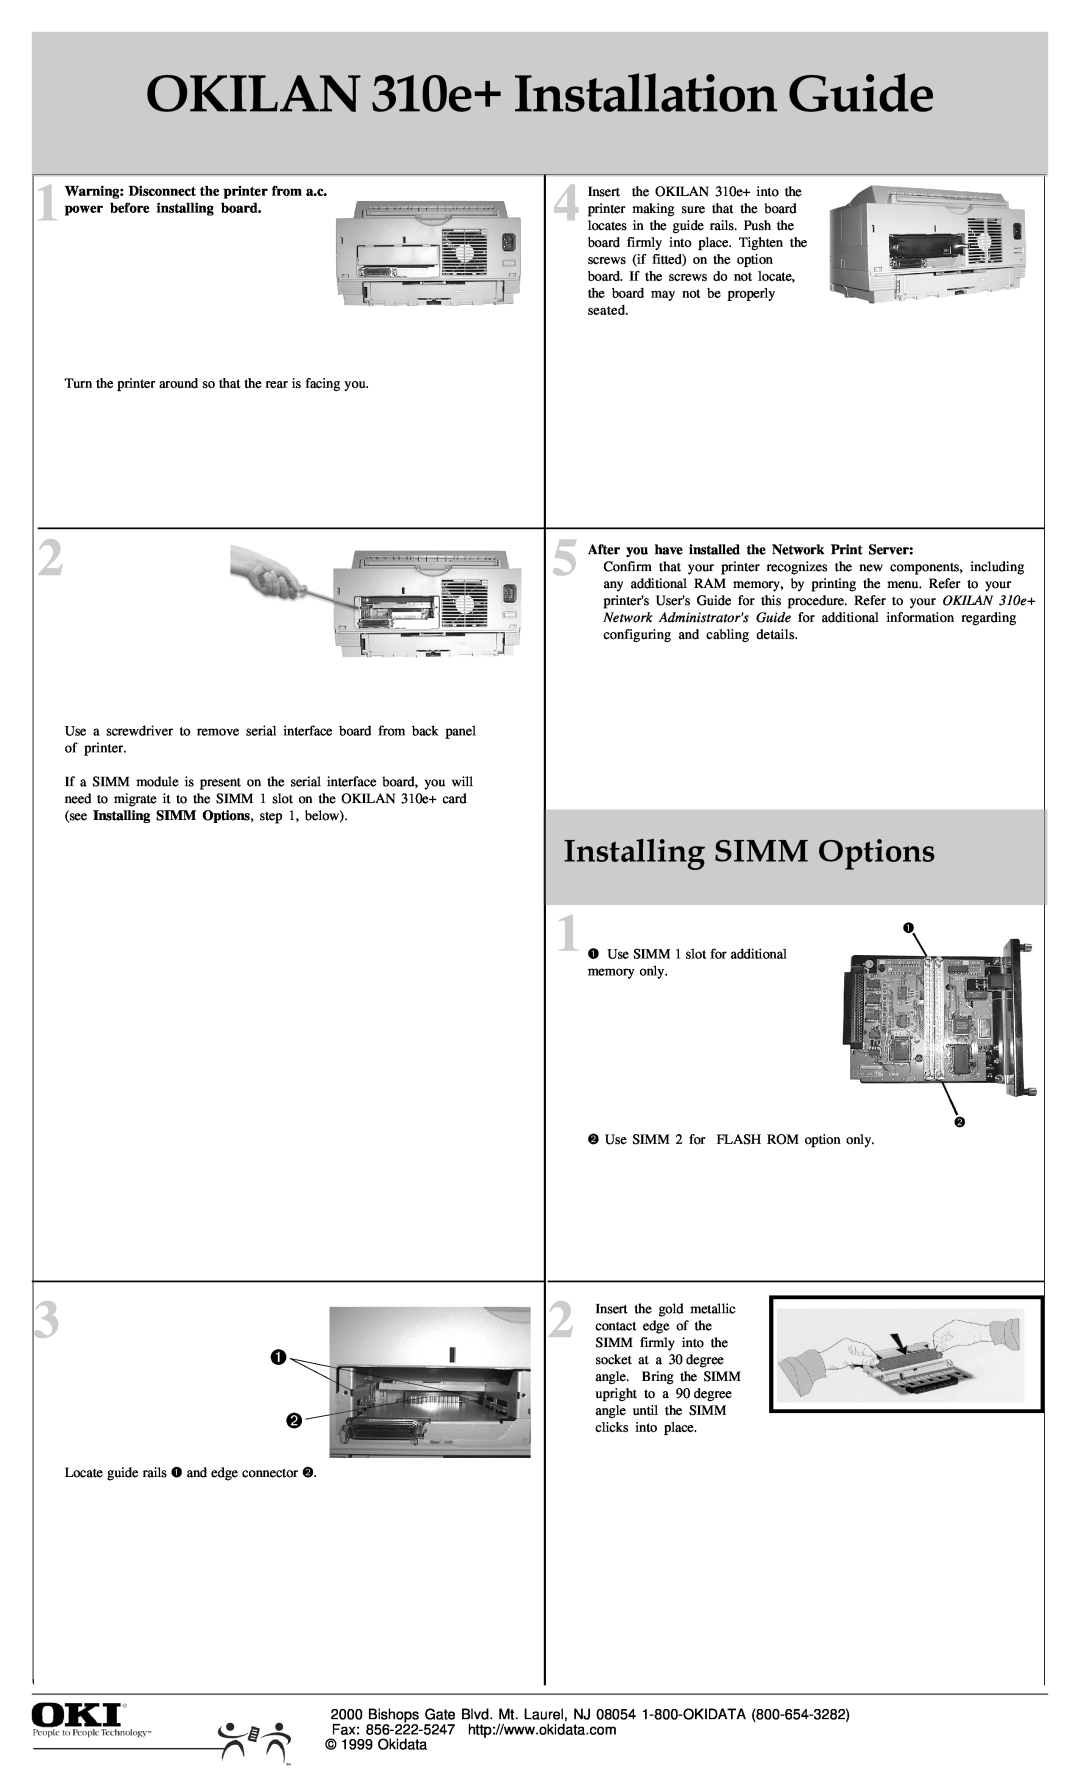 Oki 310Eplus manual OKILAN 310e+ Installation Guide, Installing SIMM Options, Warning Disconnect the printer from a.c 